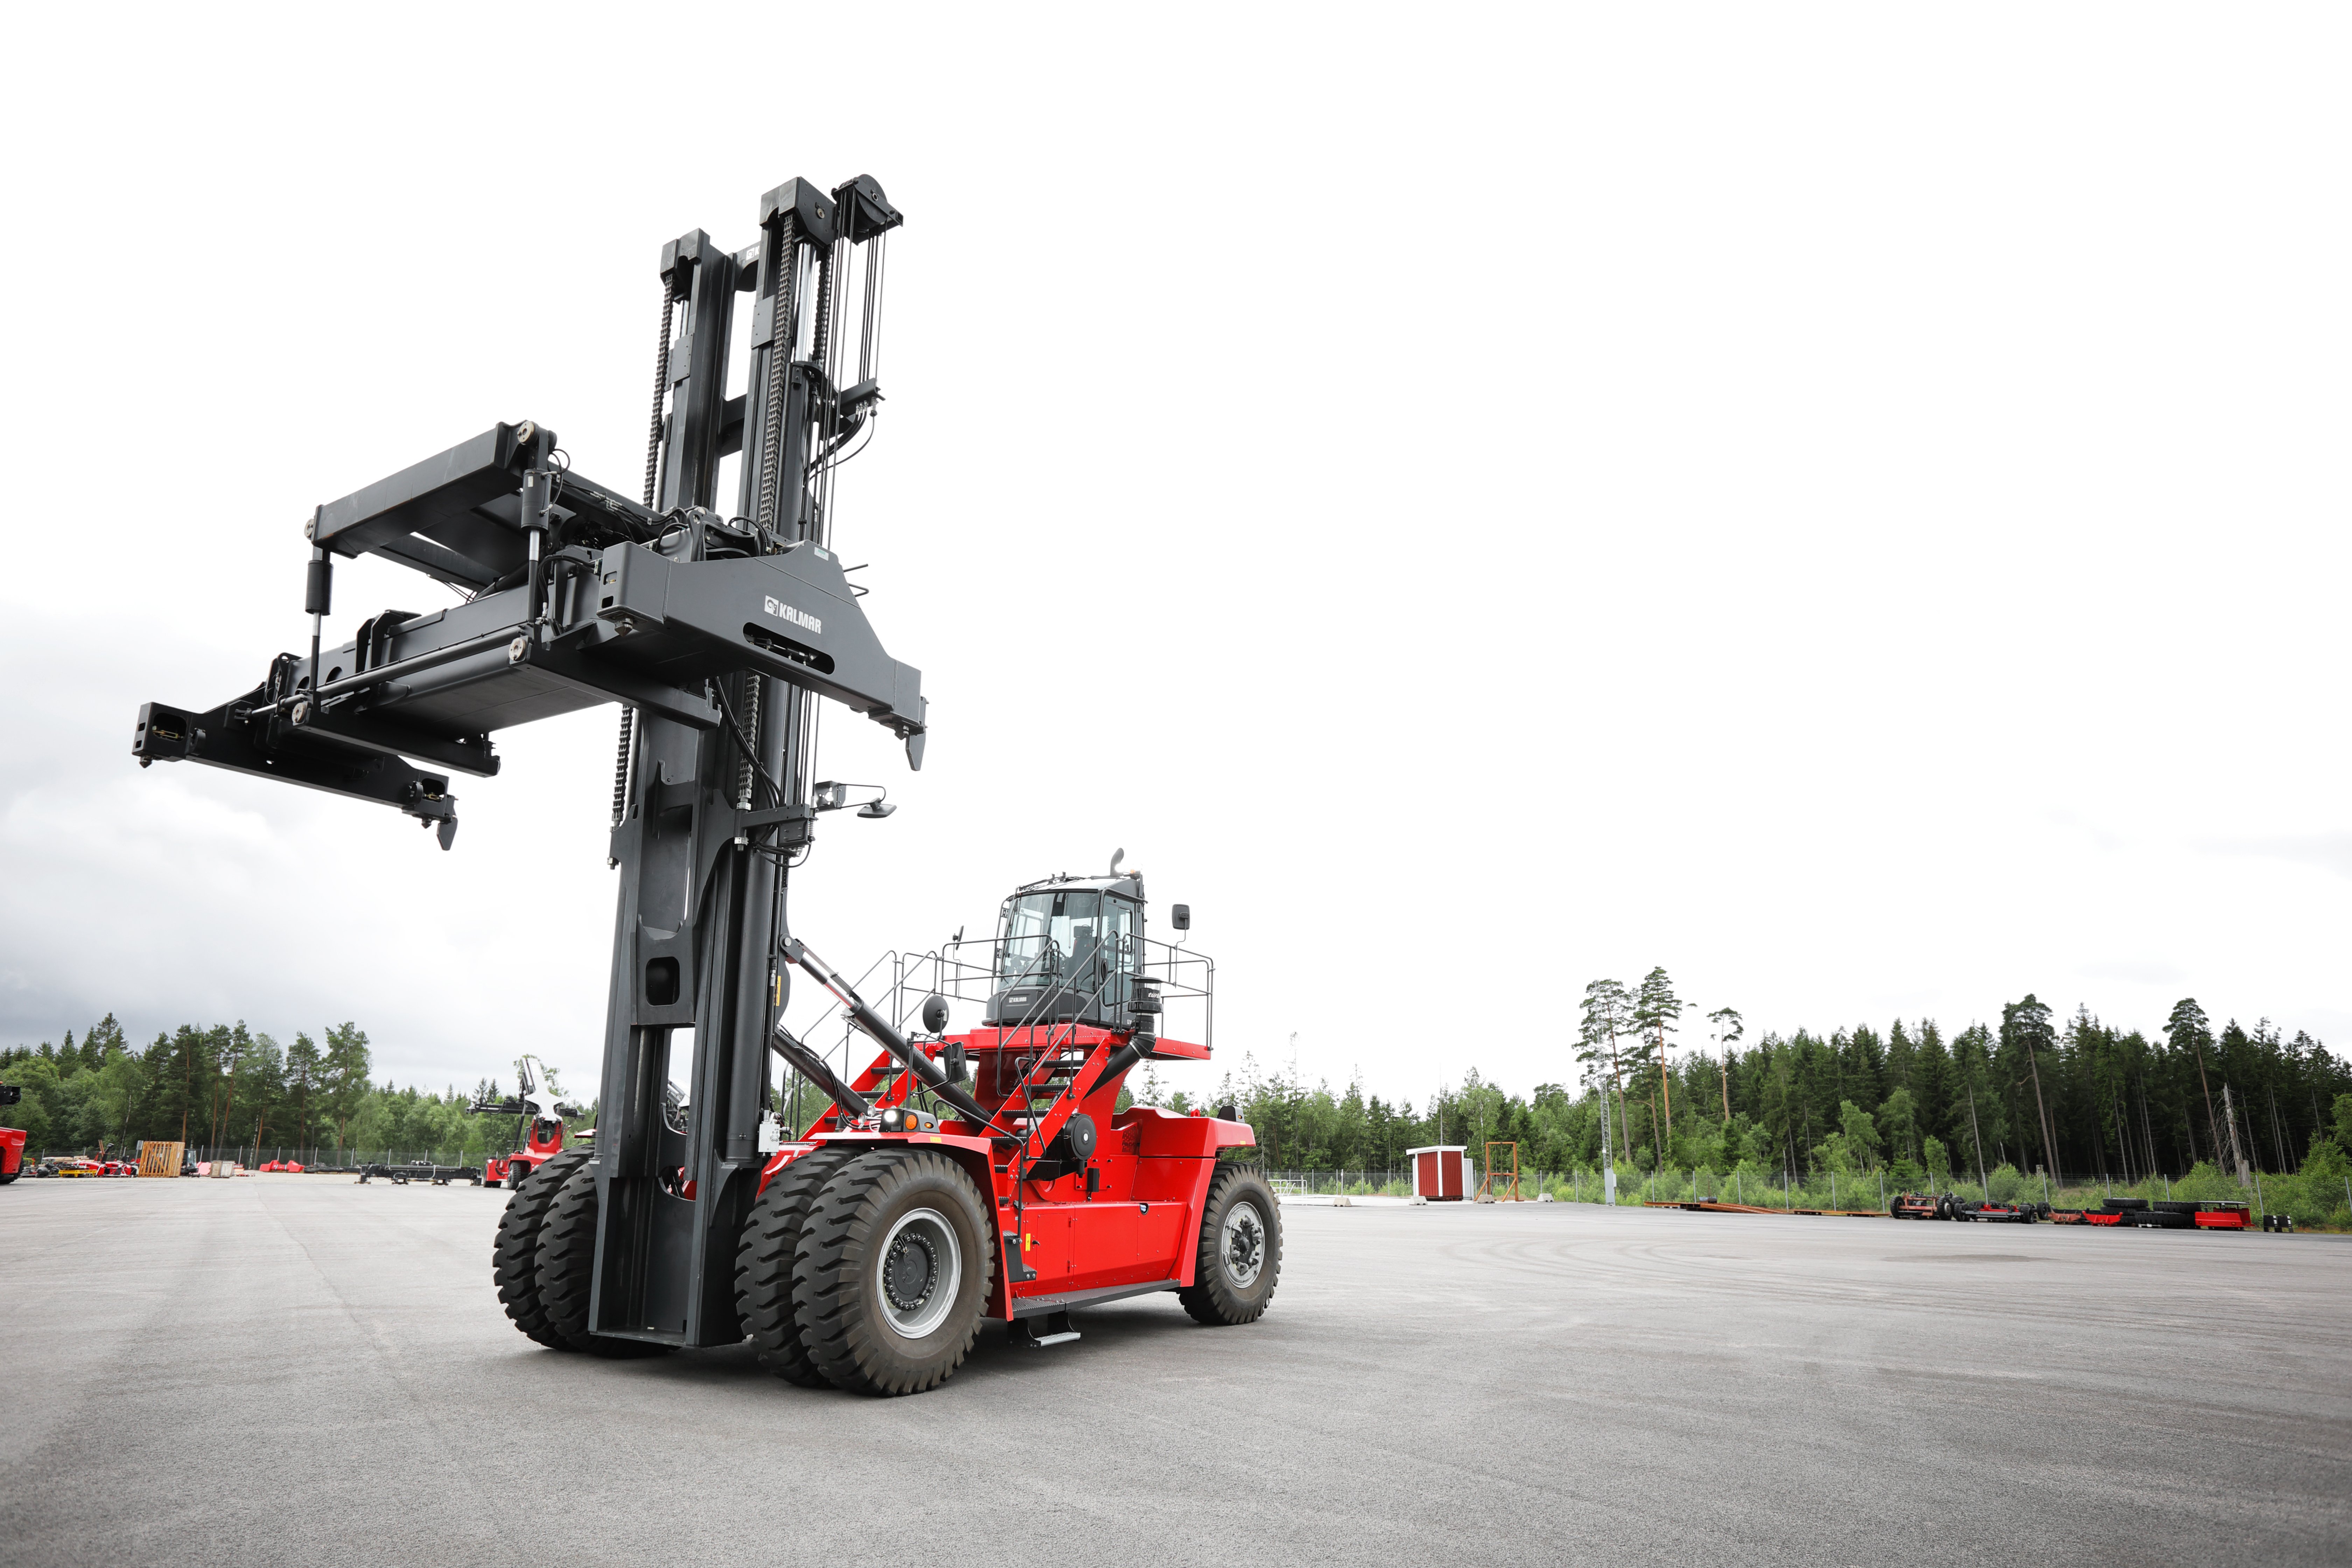 G-Generation top loaders better all round says Kalmar - Container News